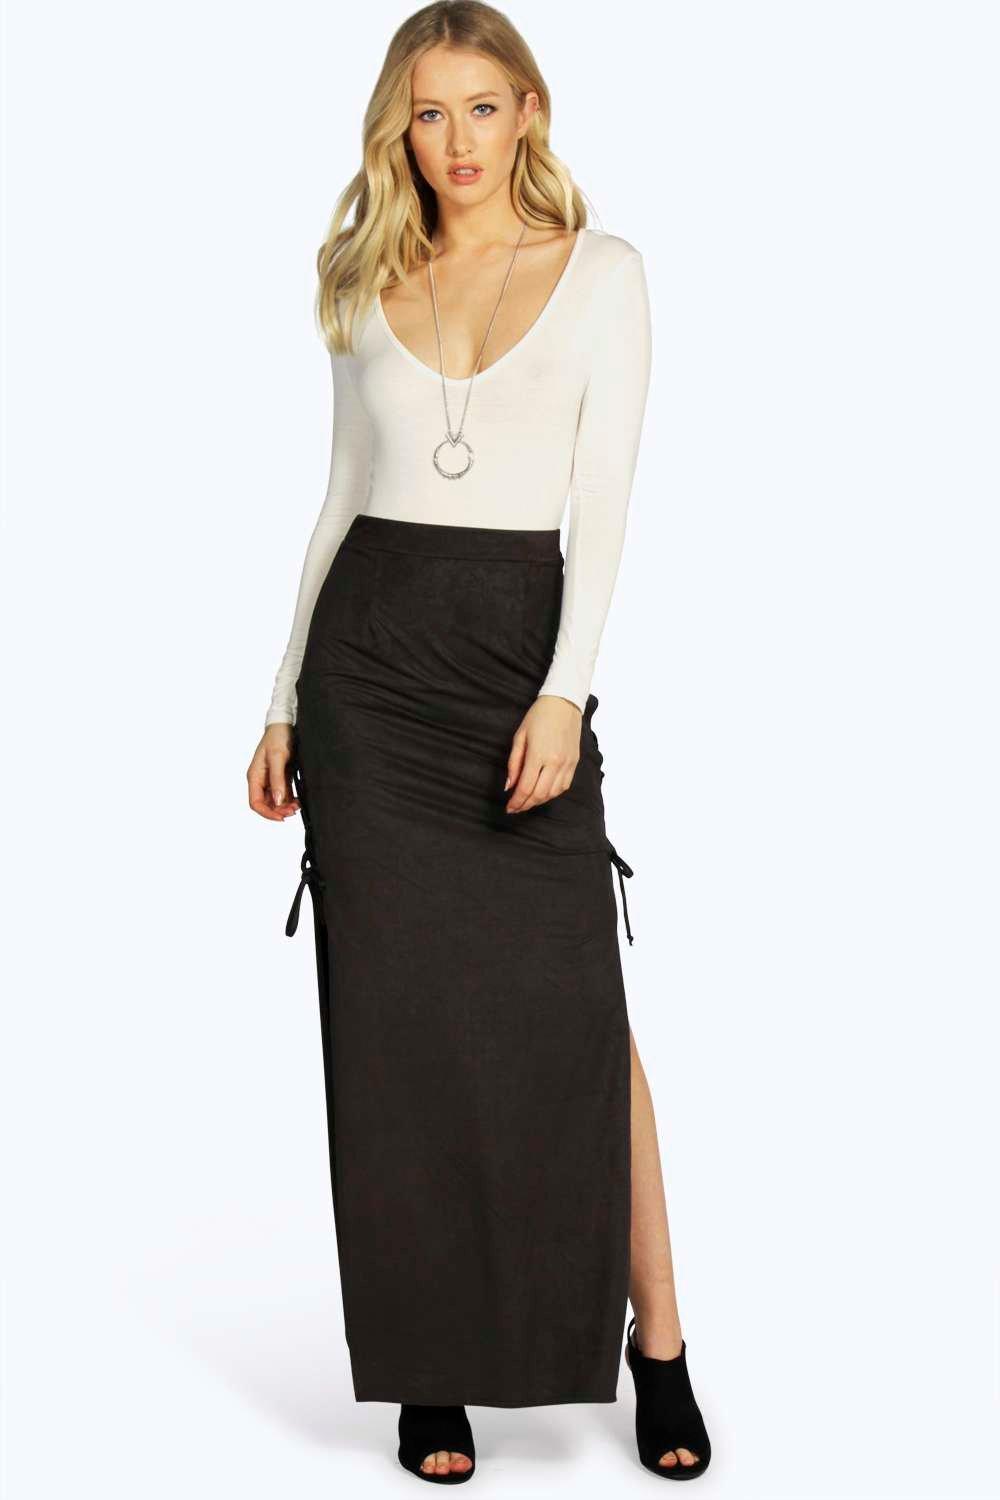 Boohoo Womens Alandria Lace Up Side Suedette Maxi Skirt | eBay